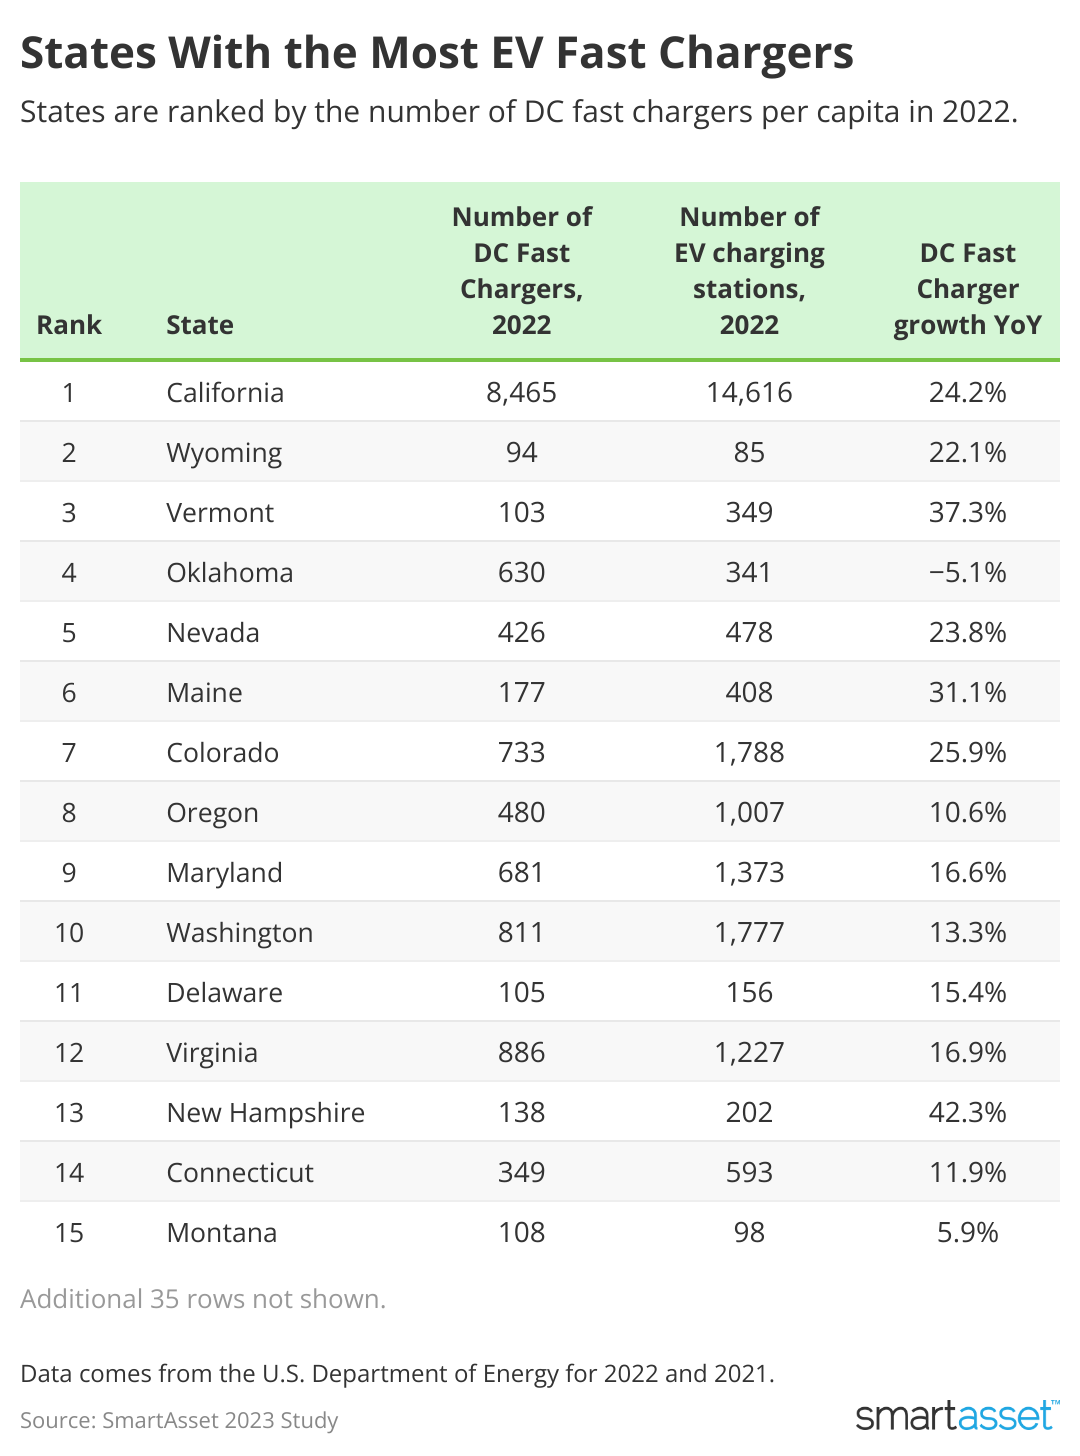 table showing top 10 states with the most DC fast chargers per capita